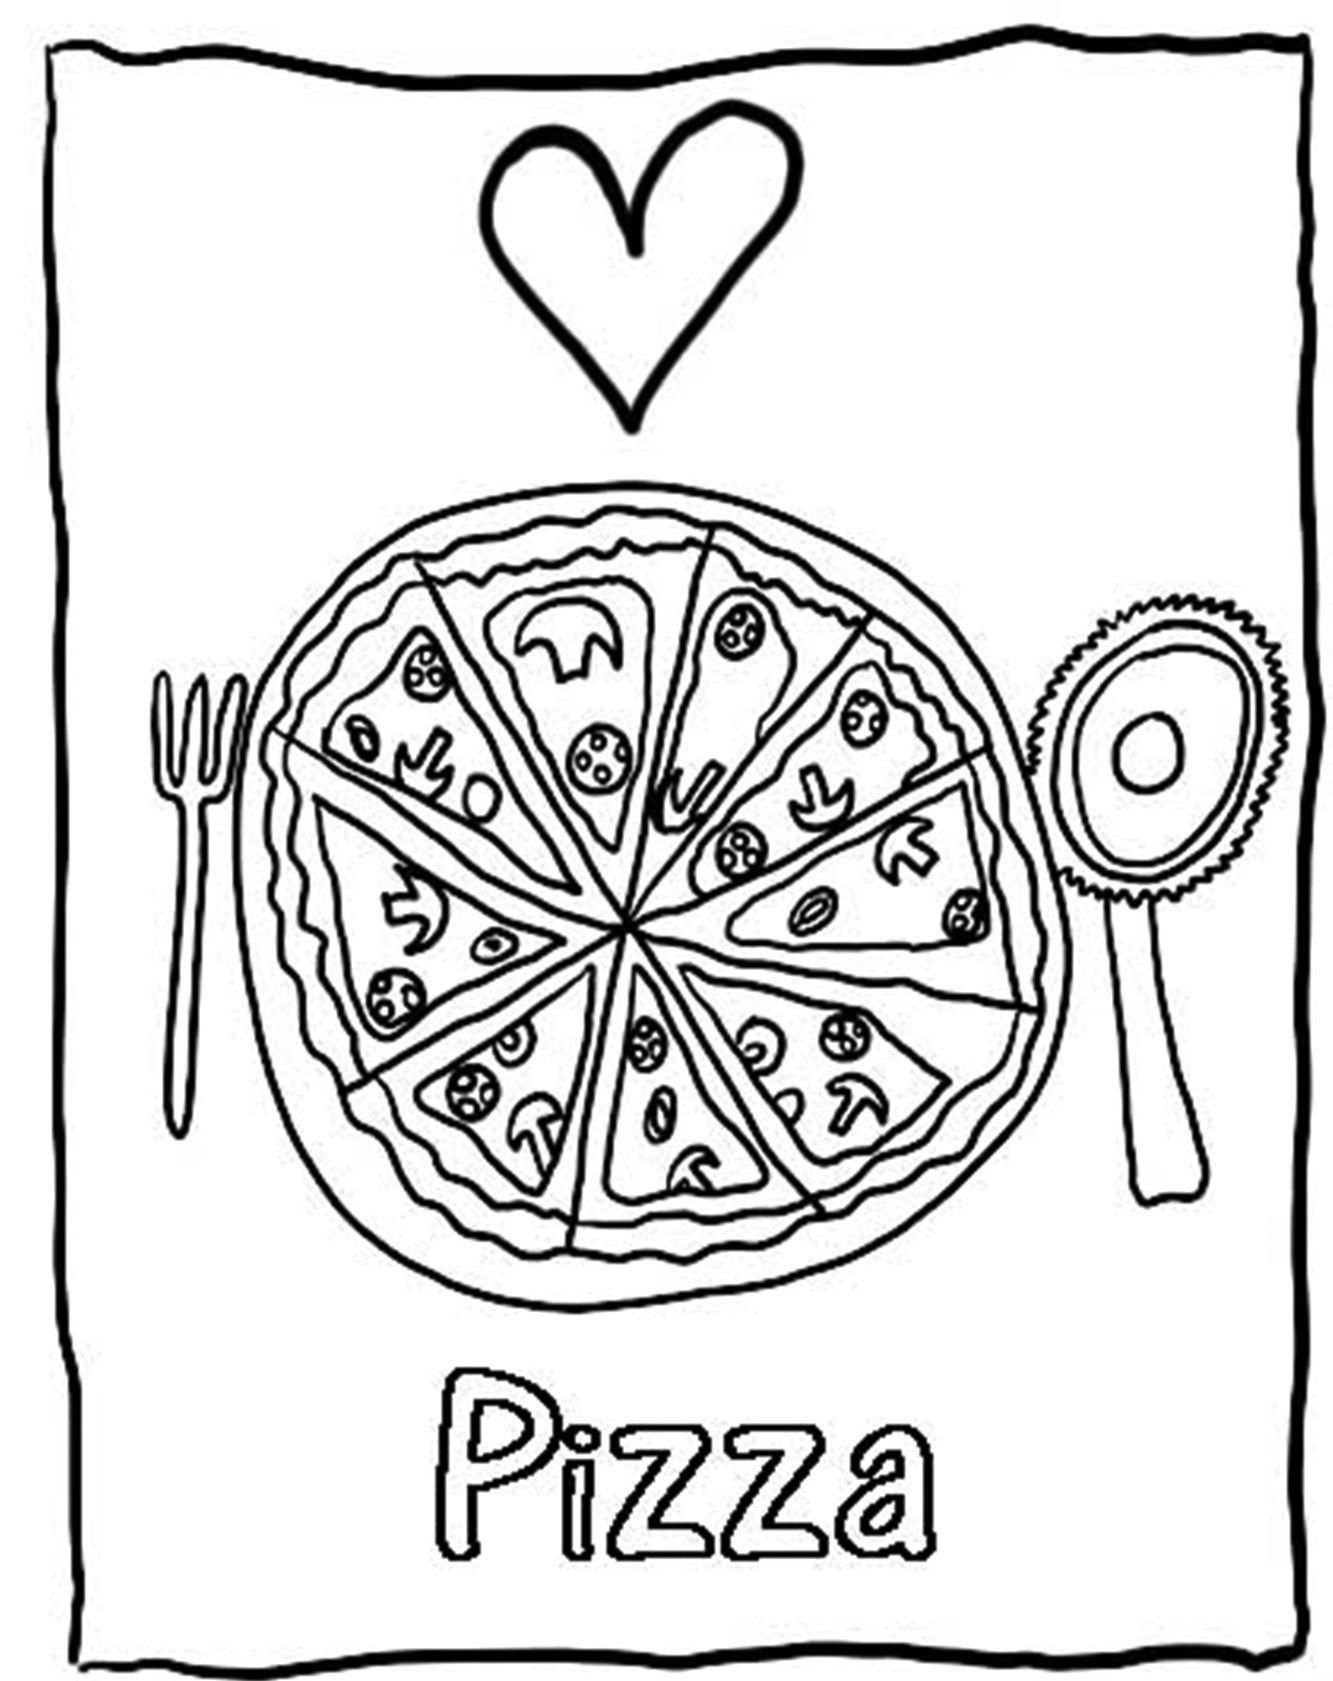 Pizza Coloring Page.